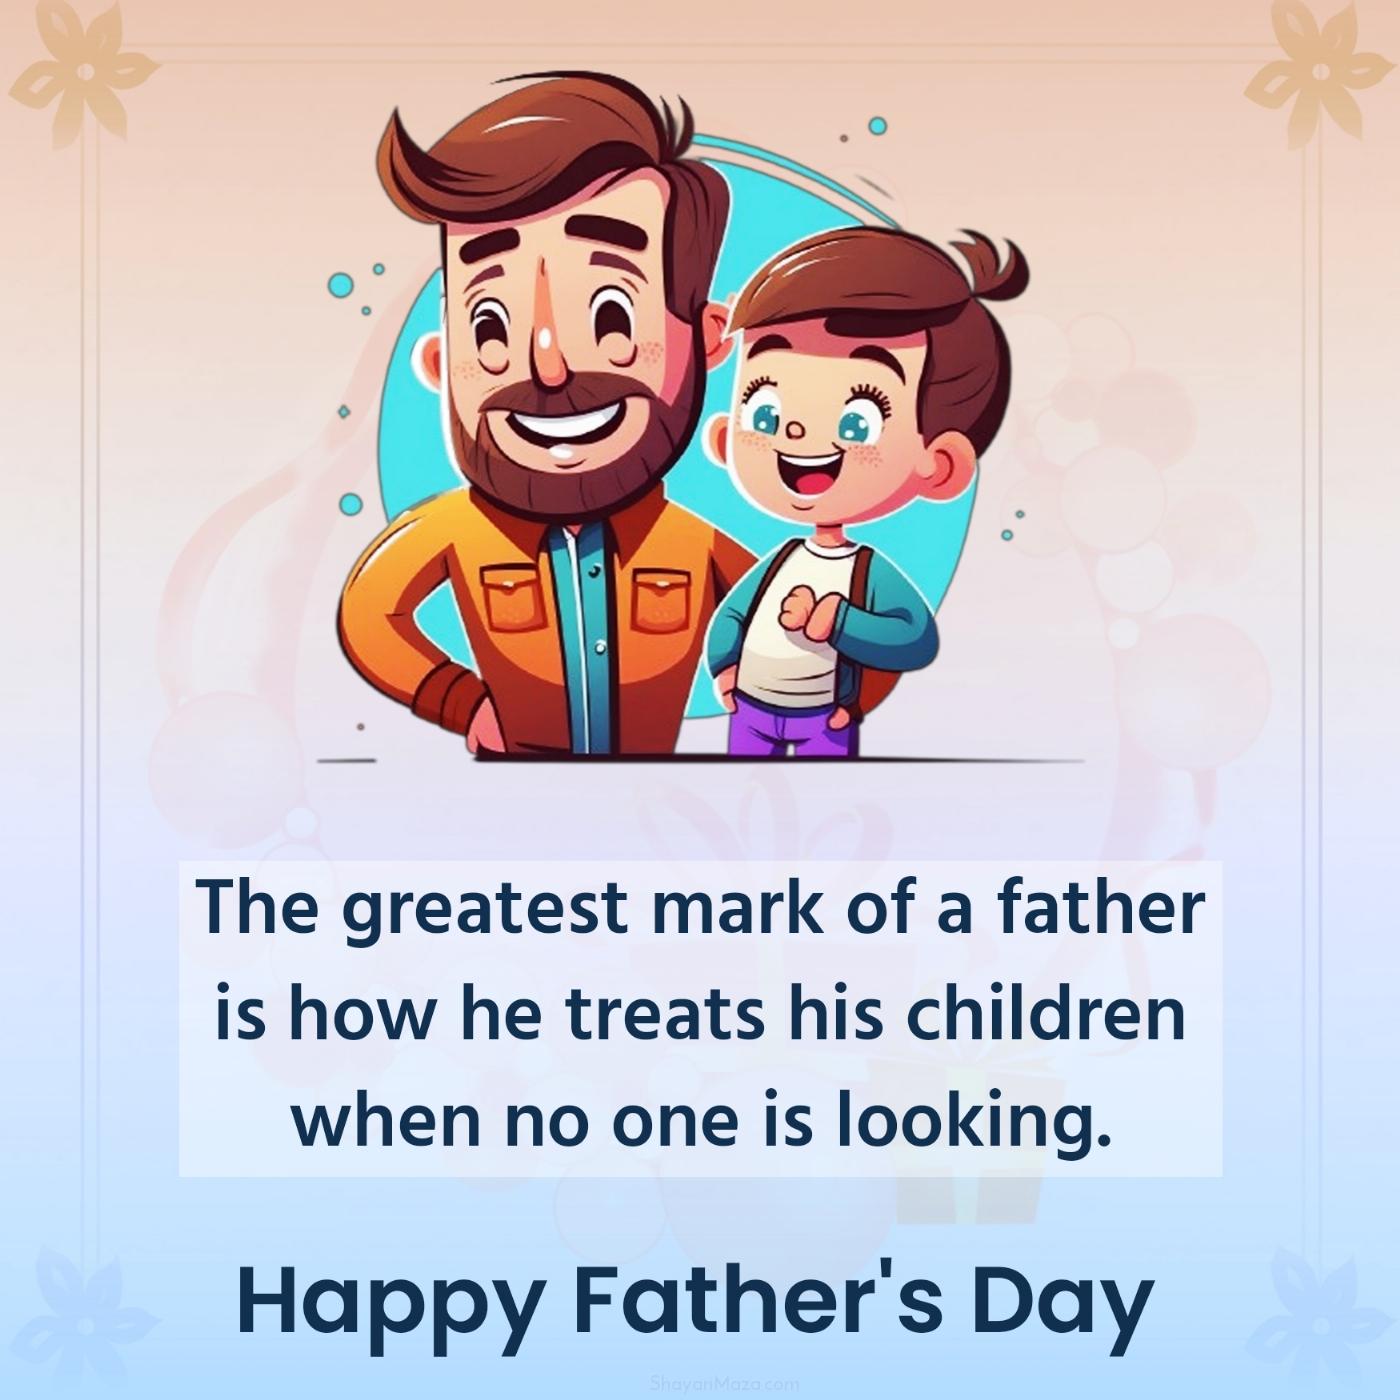 The greatest mark of a father is how he treats his children